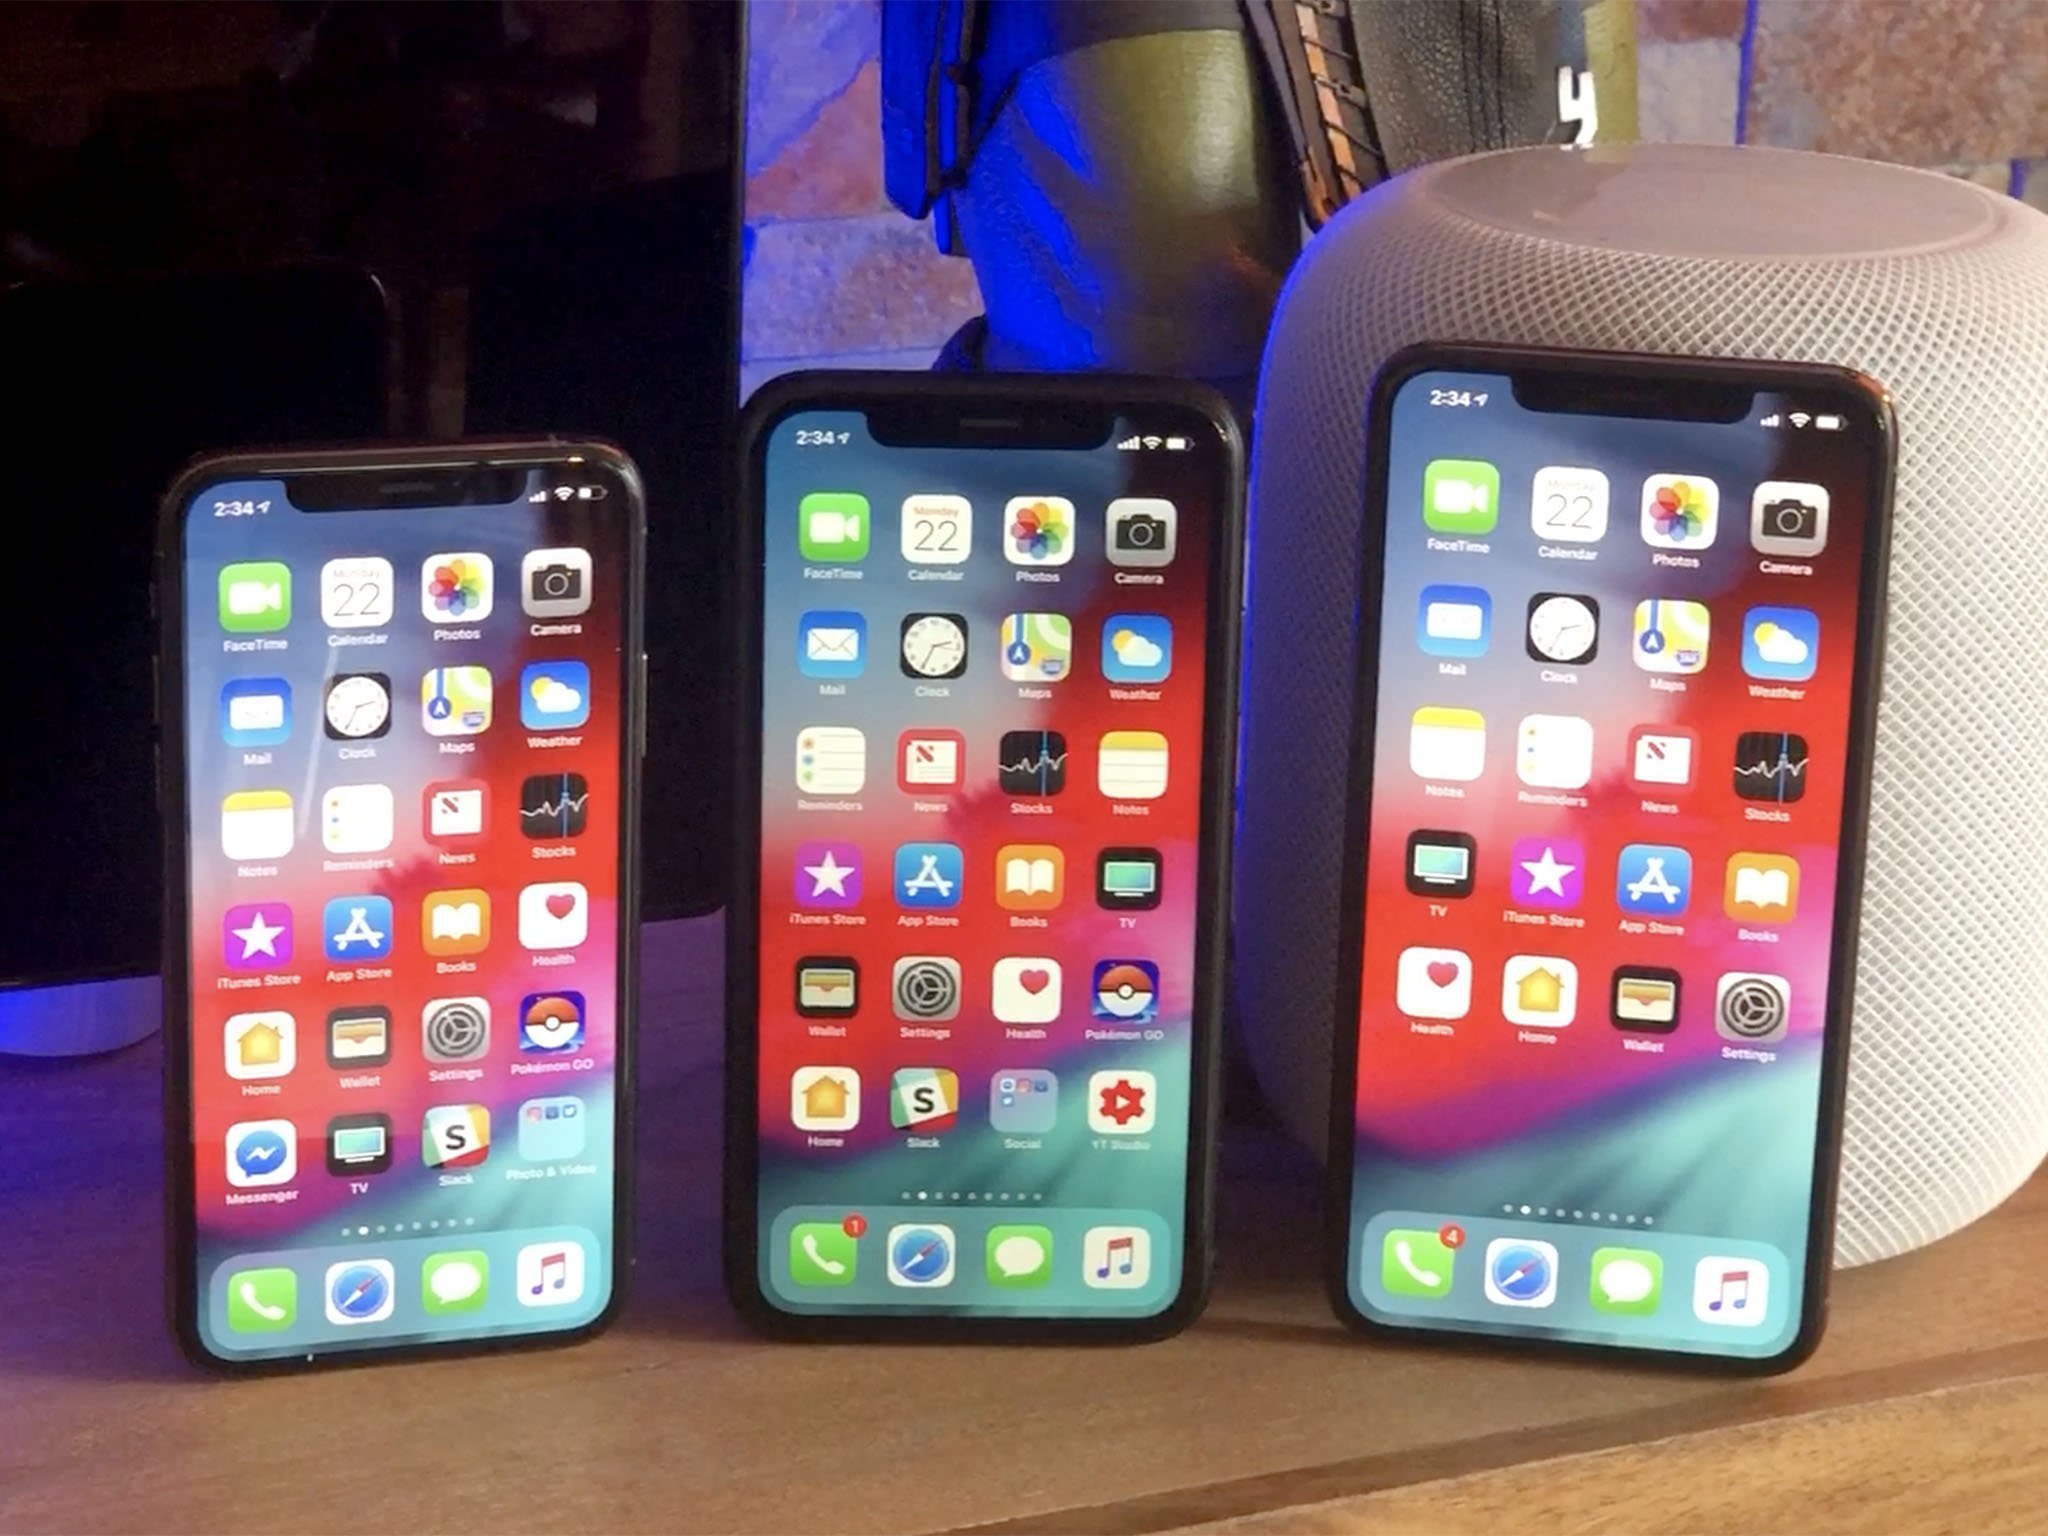 Get your iPhone a gift this Black Friday with these incredible deals - Will There Be Black Friday Deals On Iphone Xs Max